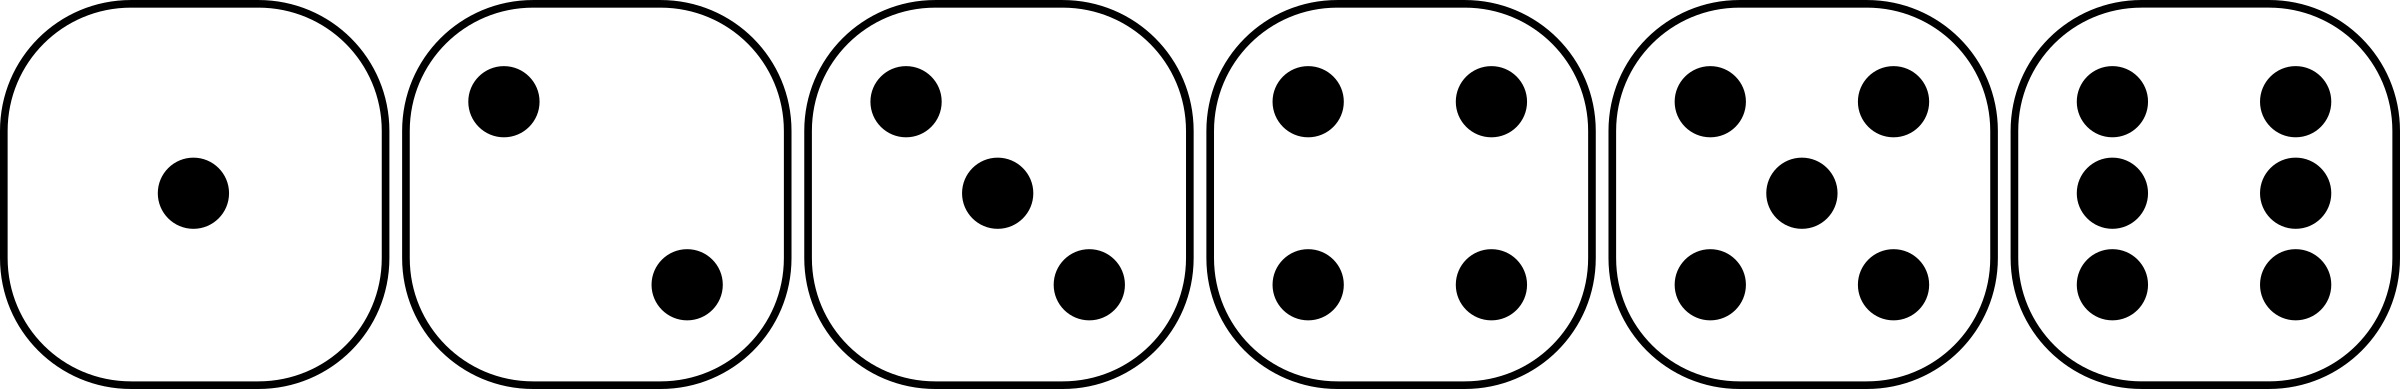 Six Sided Dice Faces Lio 01